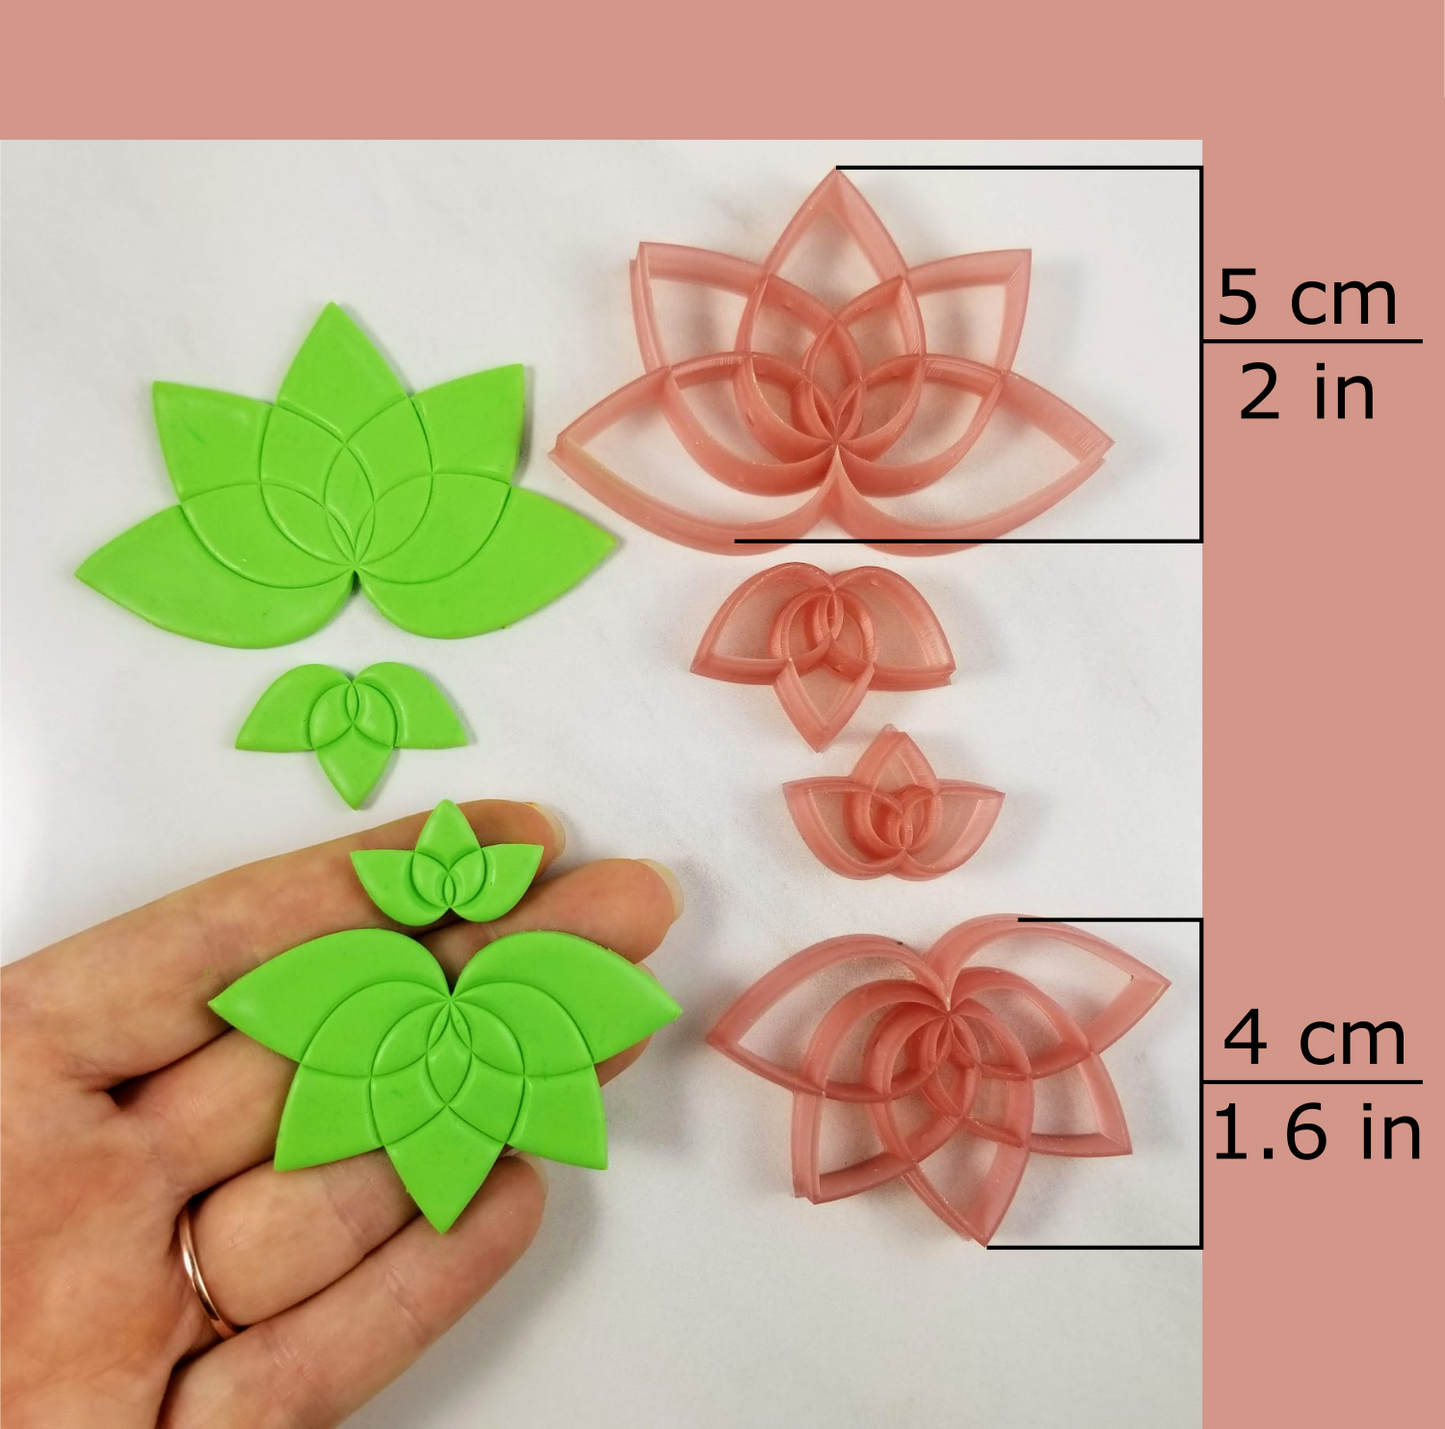 lotus shape polymer clay cutter available sizes, 5 centimeter / 2 inches, and 4 centimeters / 1.6 inches